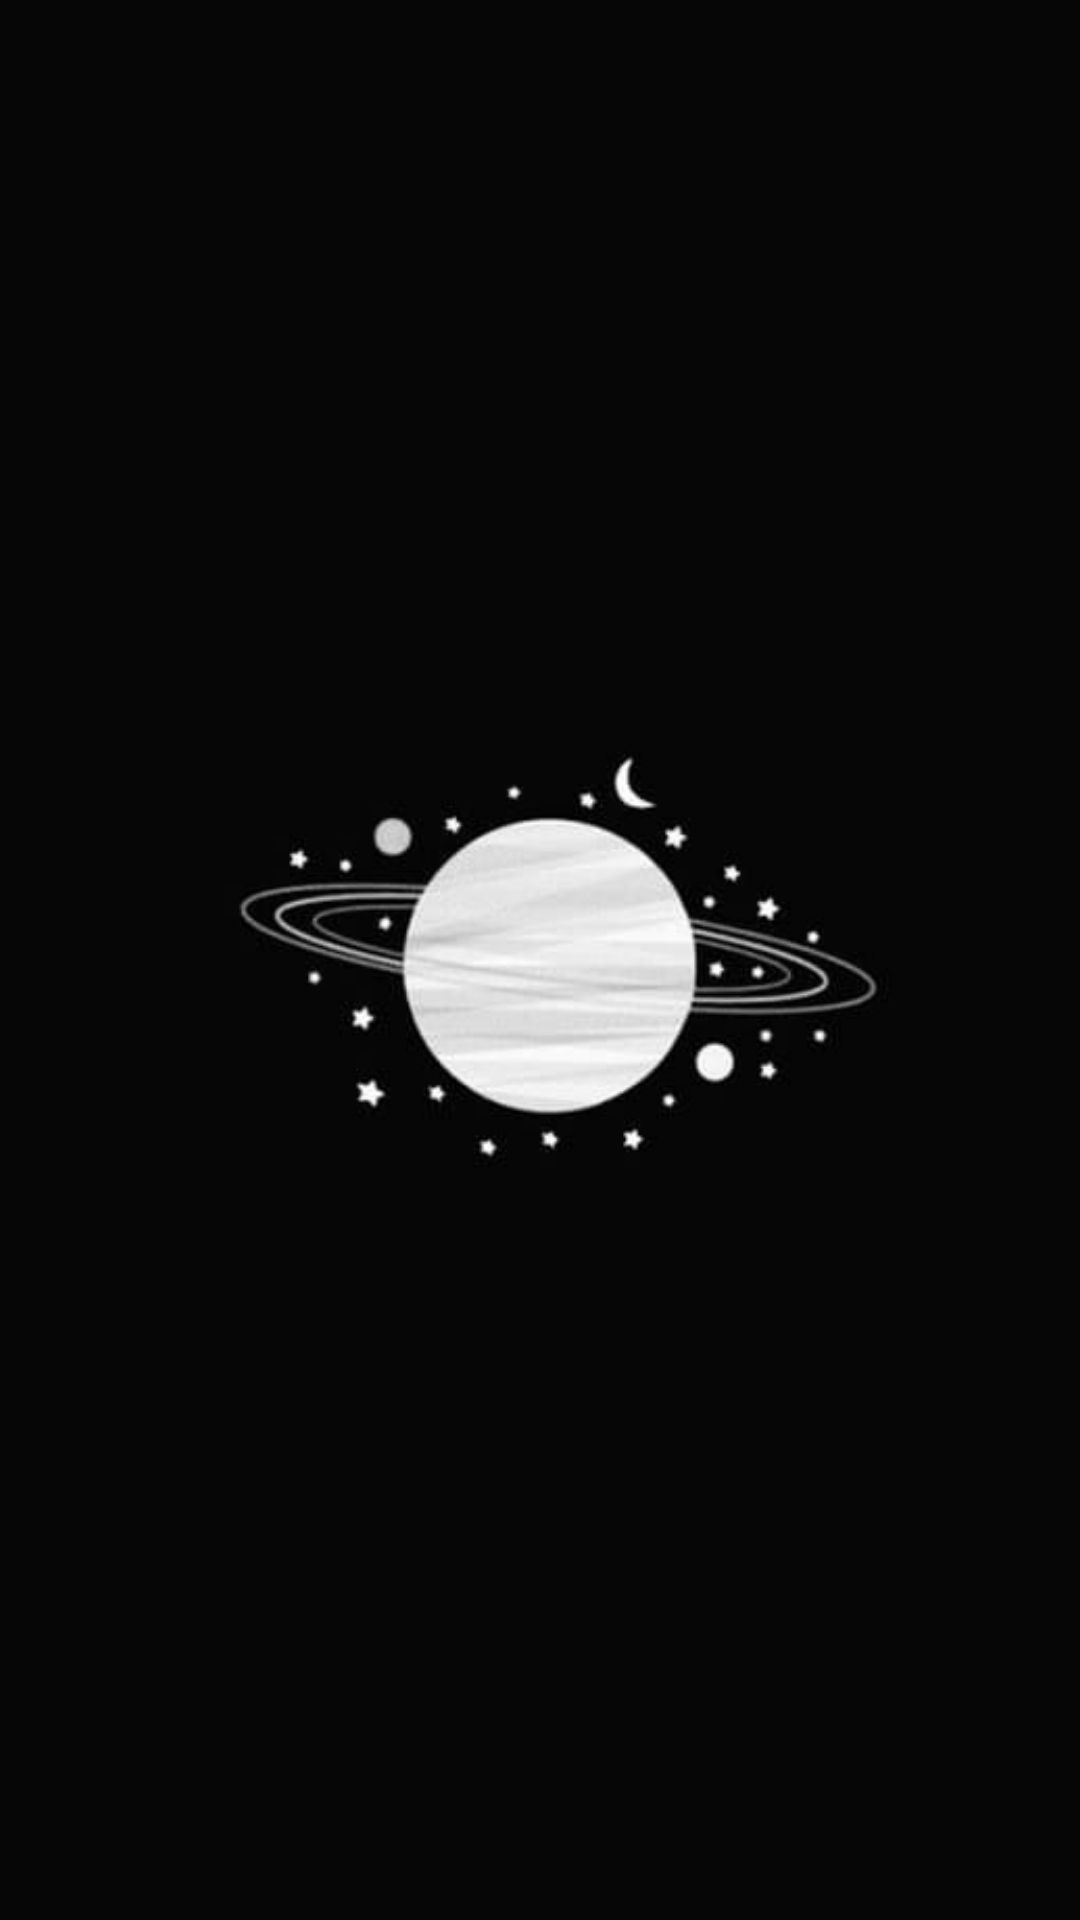 The planet saturn with a black background - Black